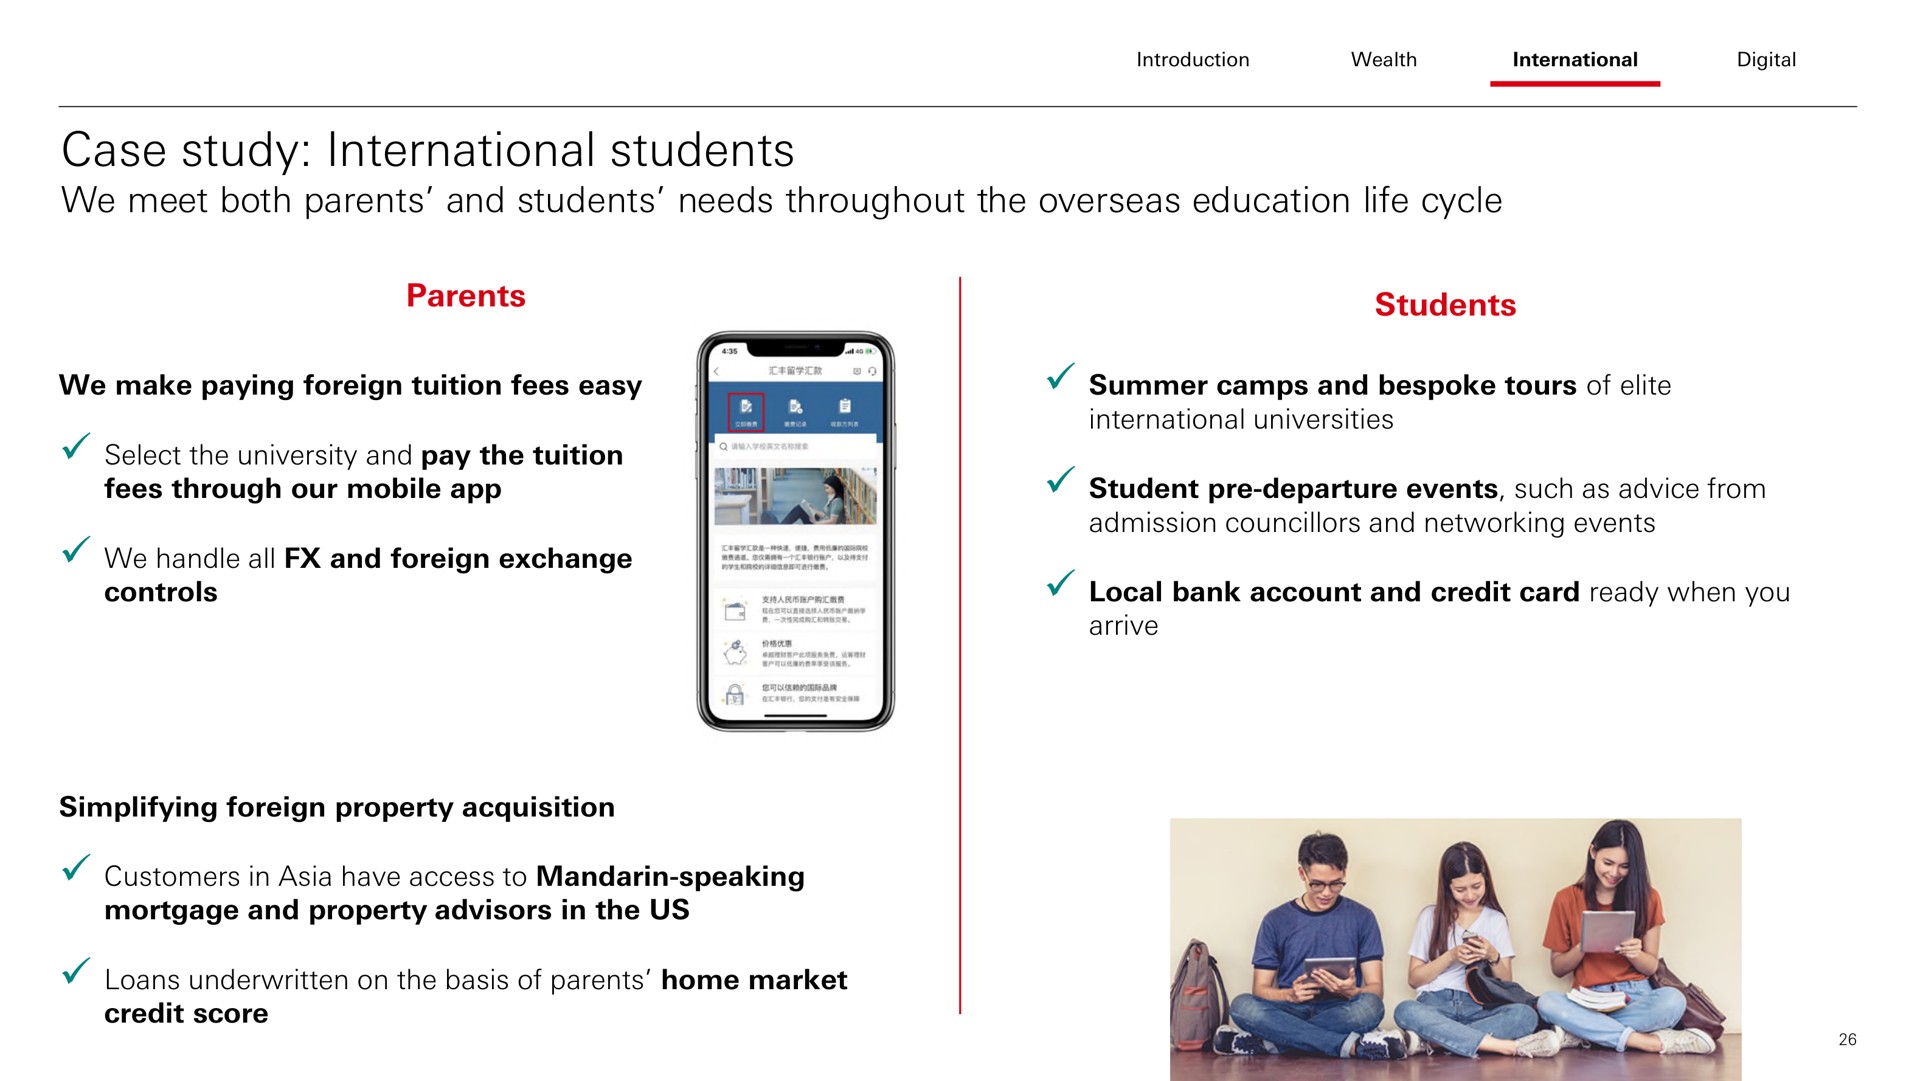 case study international students we meet both parents and needs throughout the overseas education life cycle | HSBC